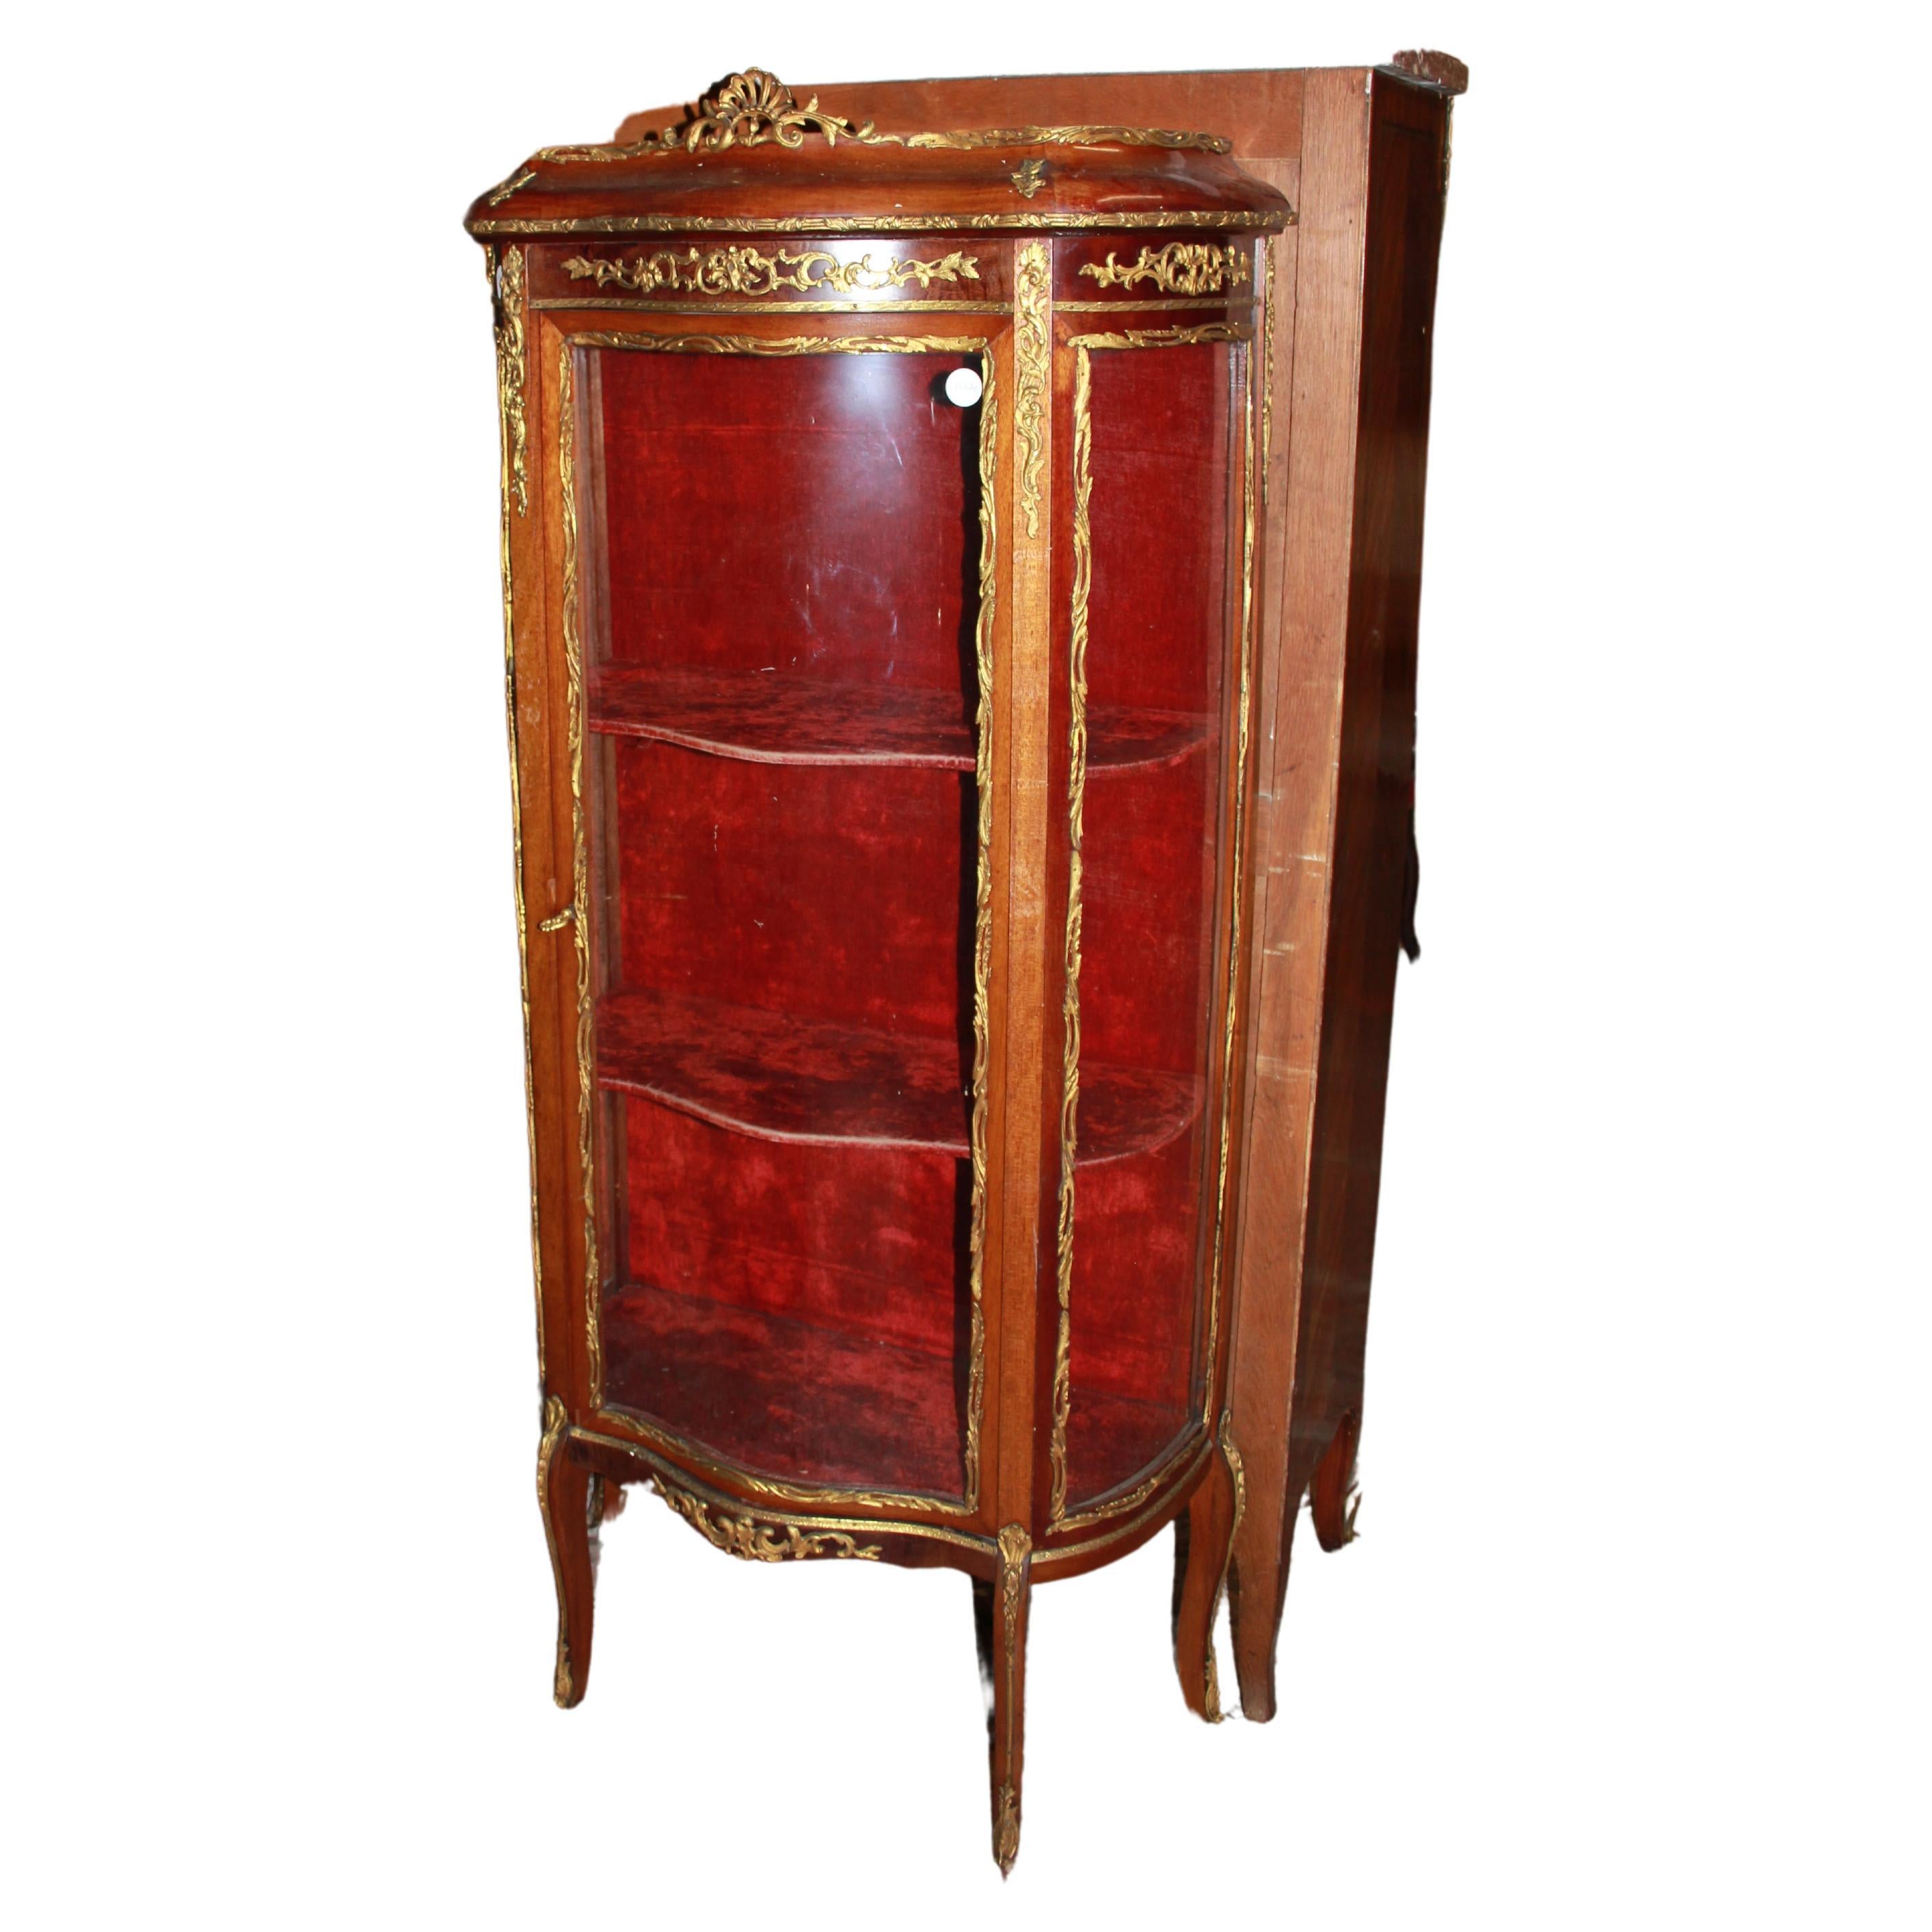  French display cabinet in Transition style from the 1800s, made of mahogany 